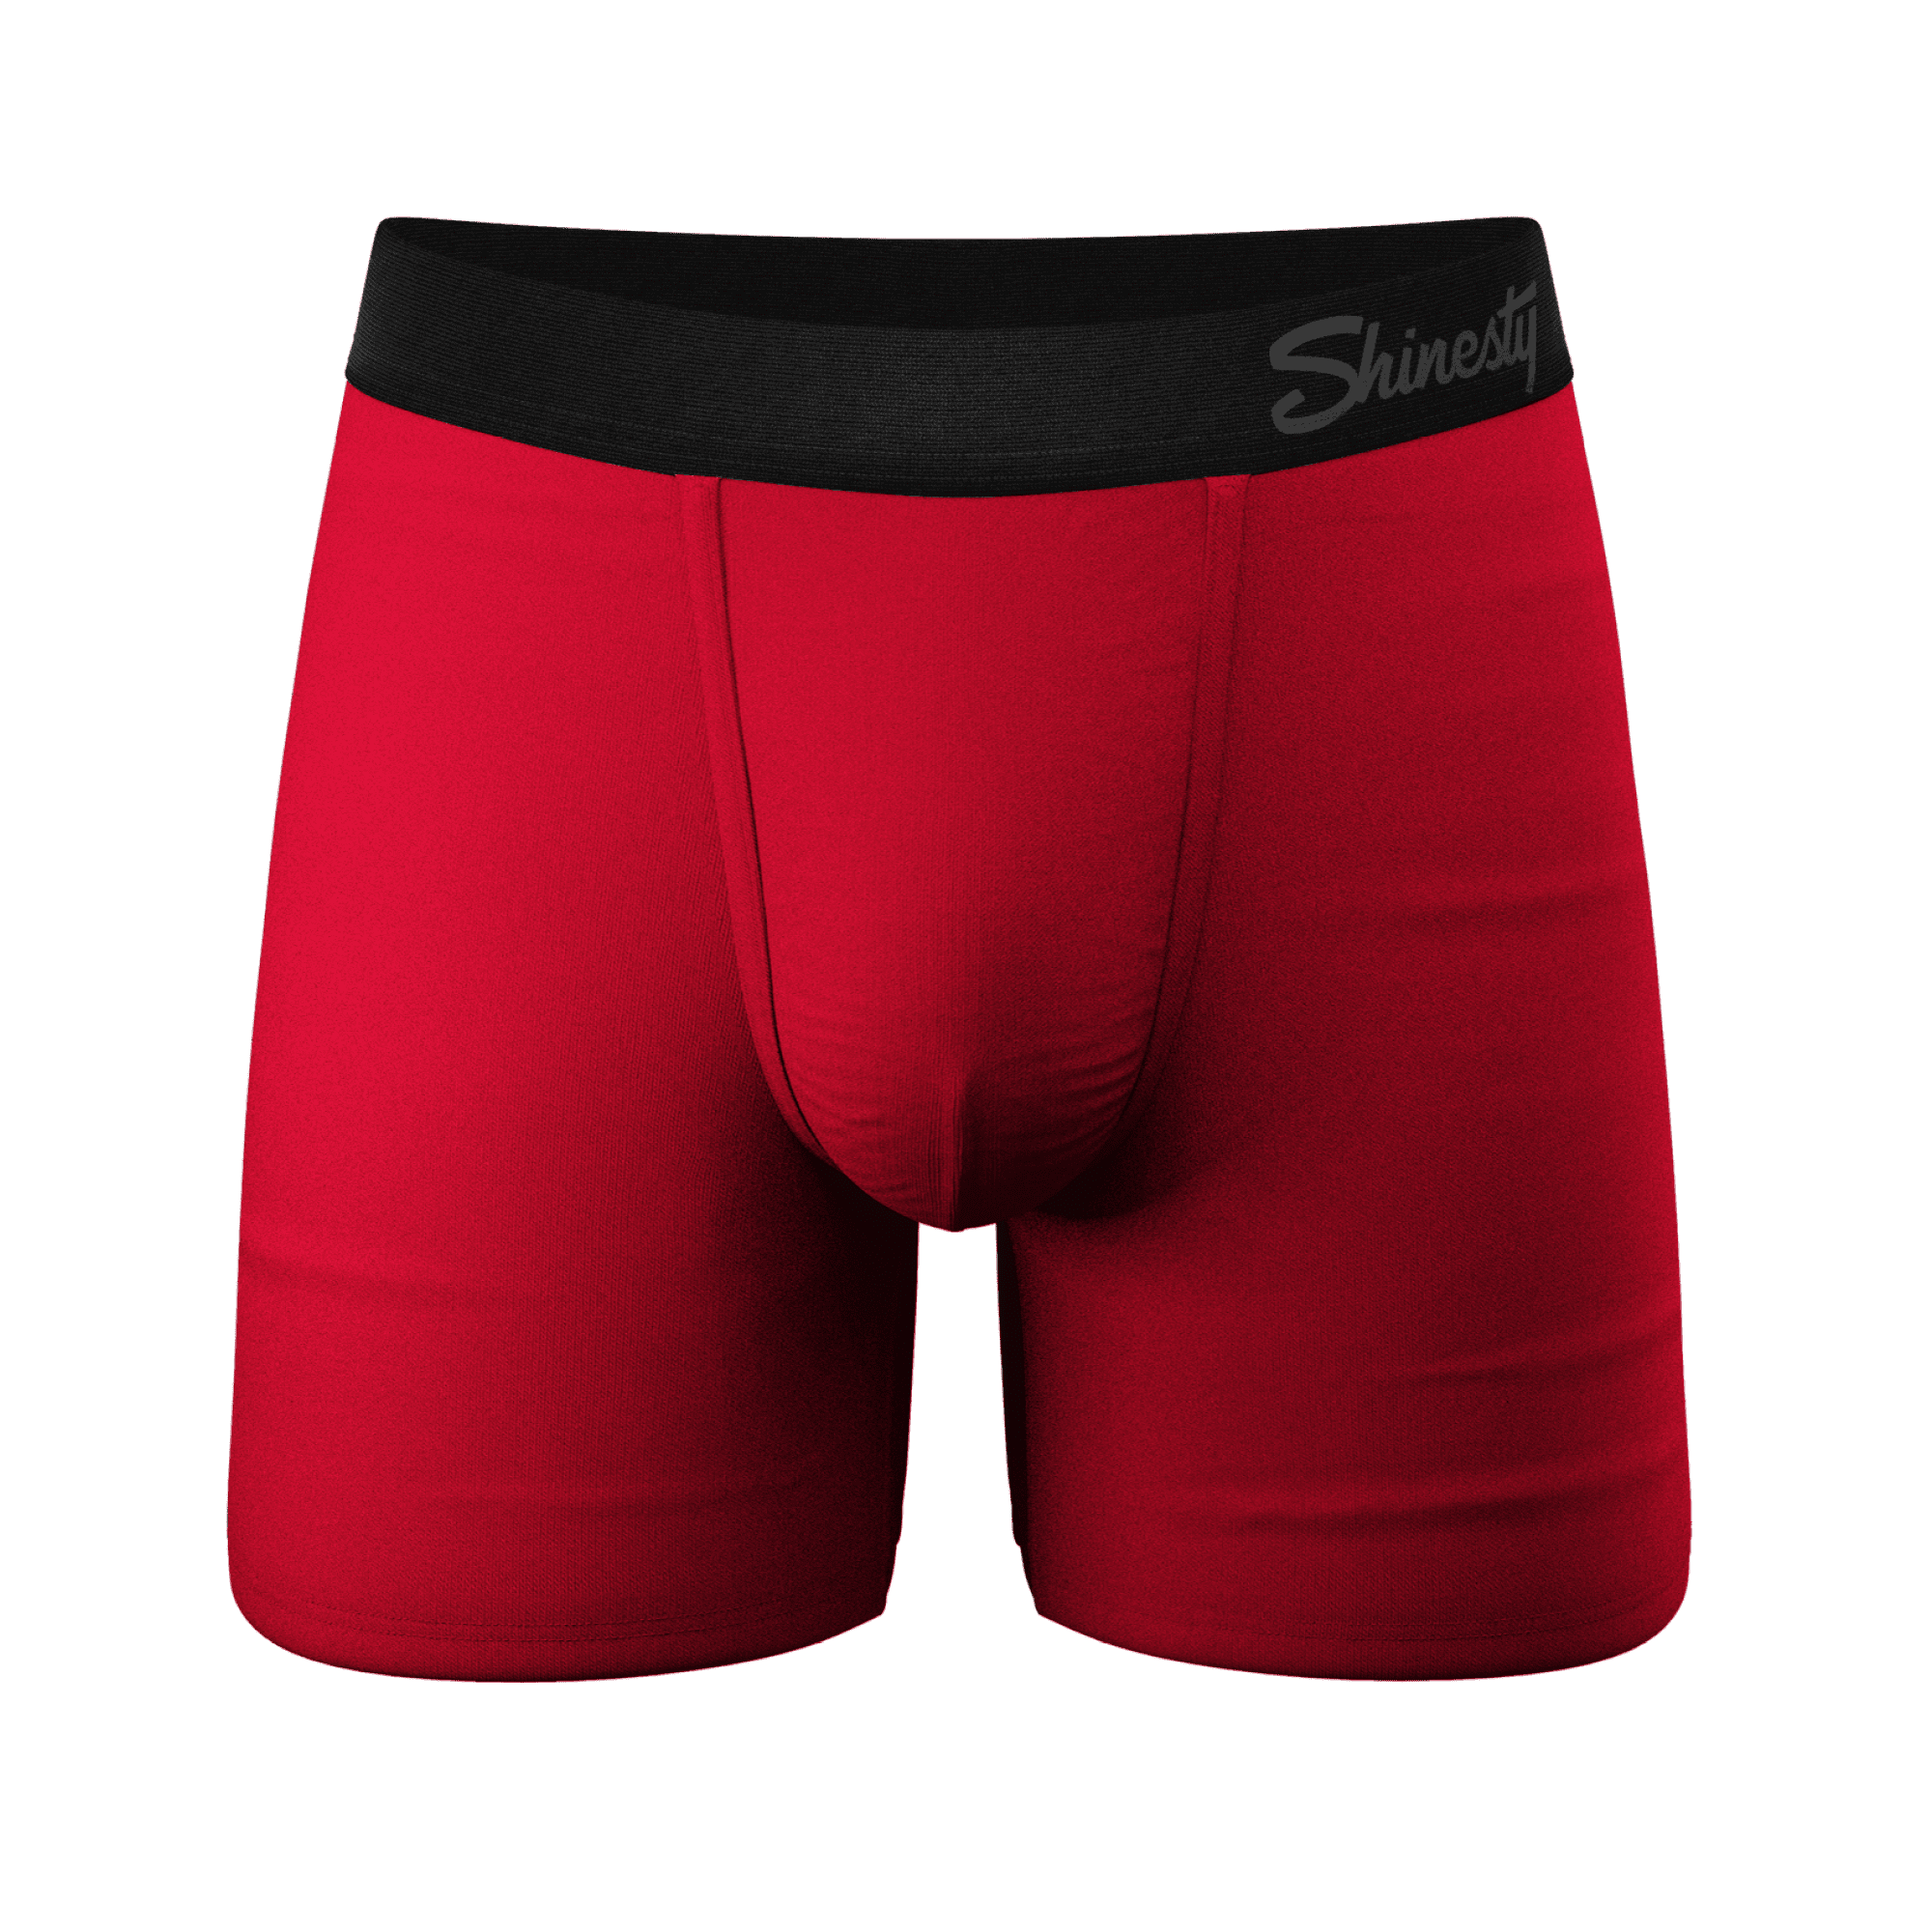 Shinesty Briefs: A Review